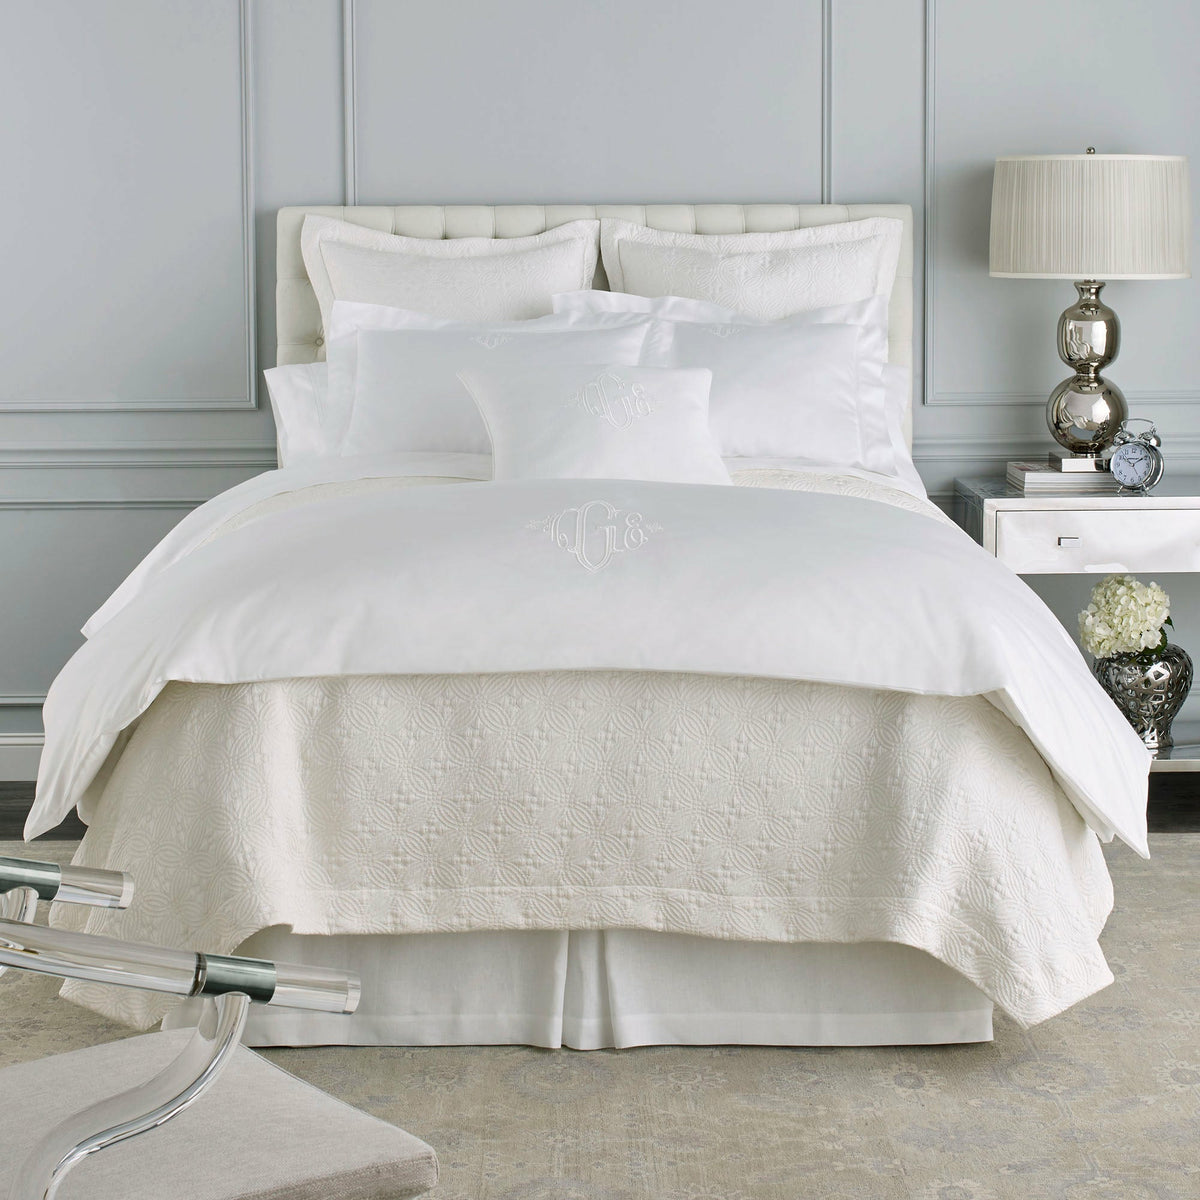 Peacock Alley Lucia Bedding Lifestyle 2 Fine Linens